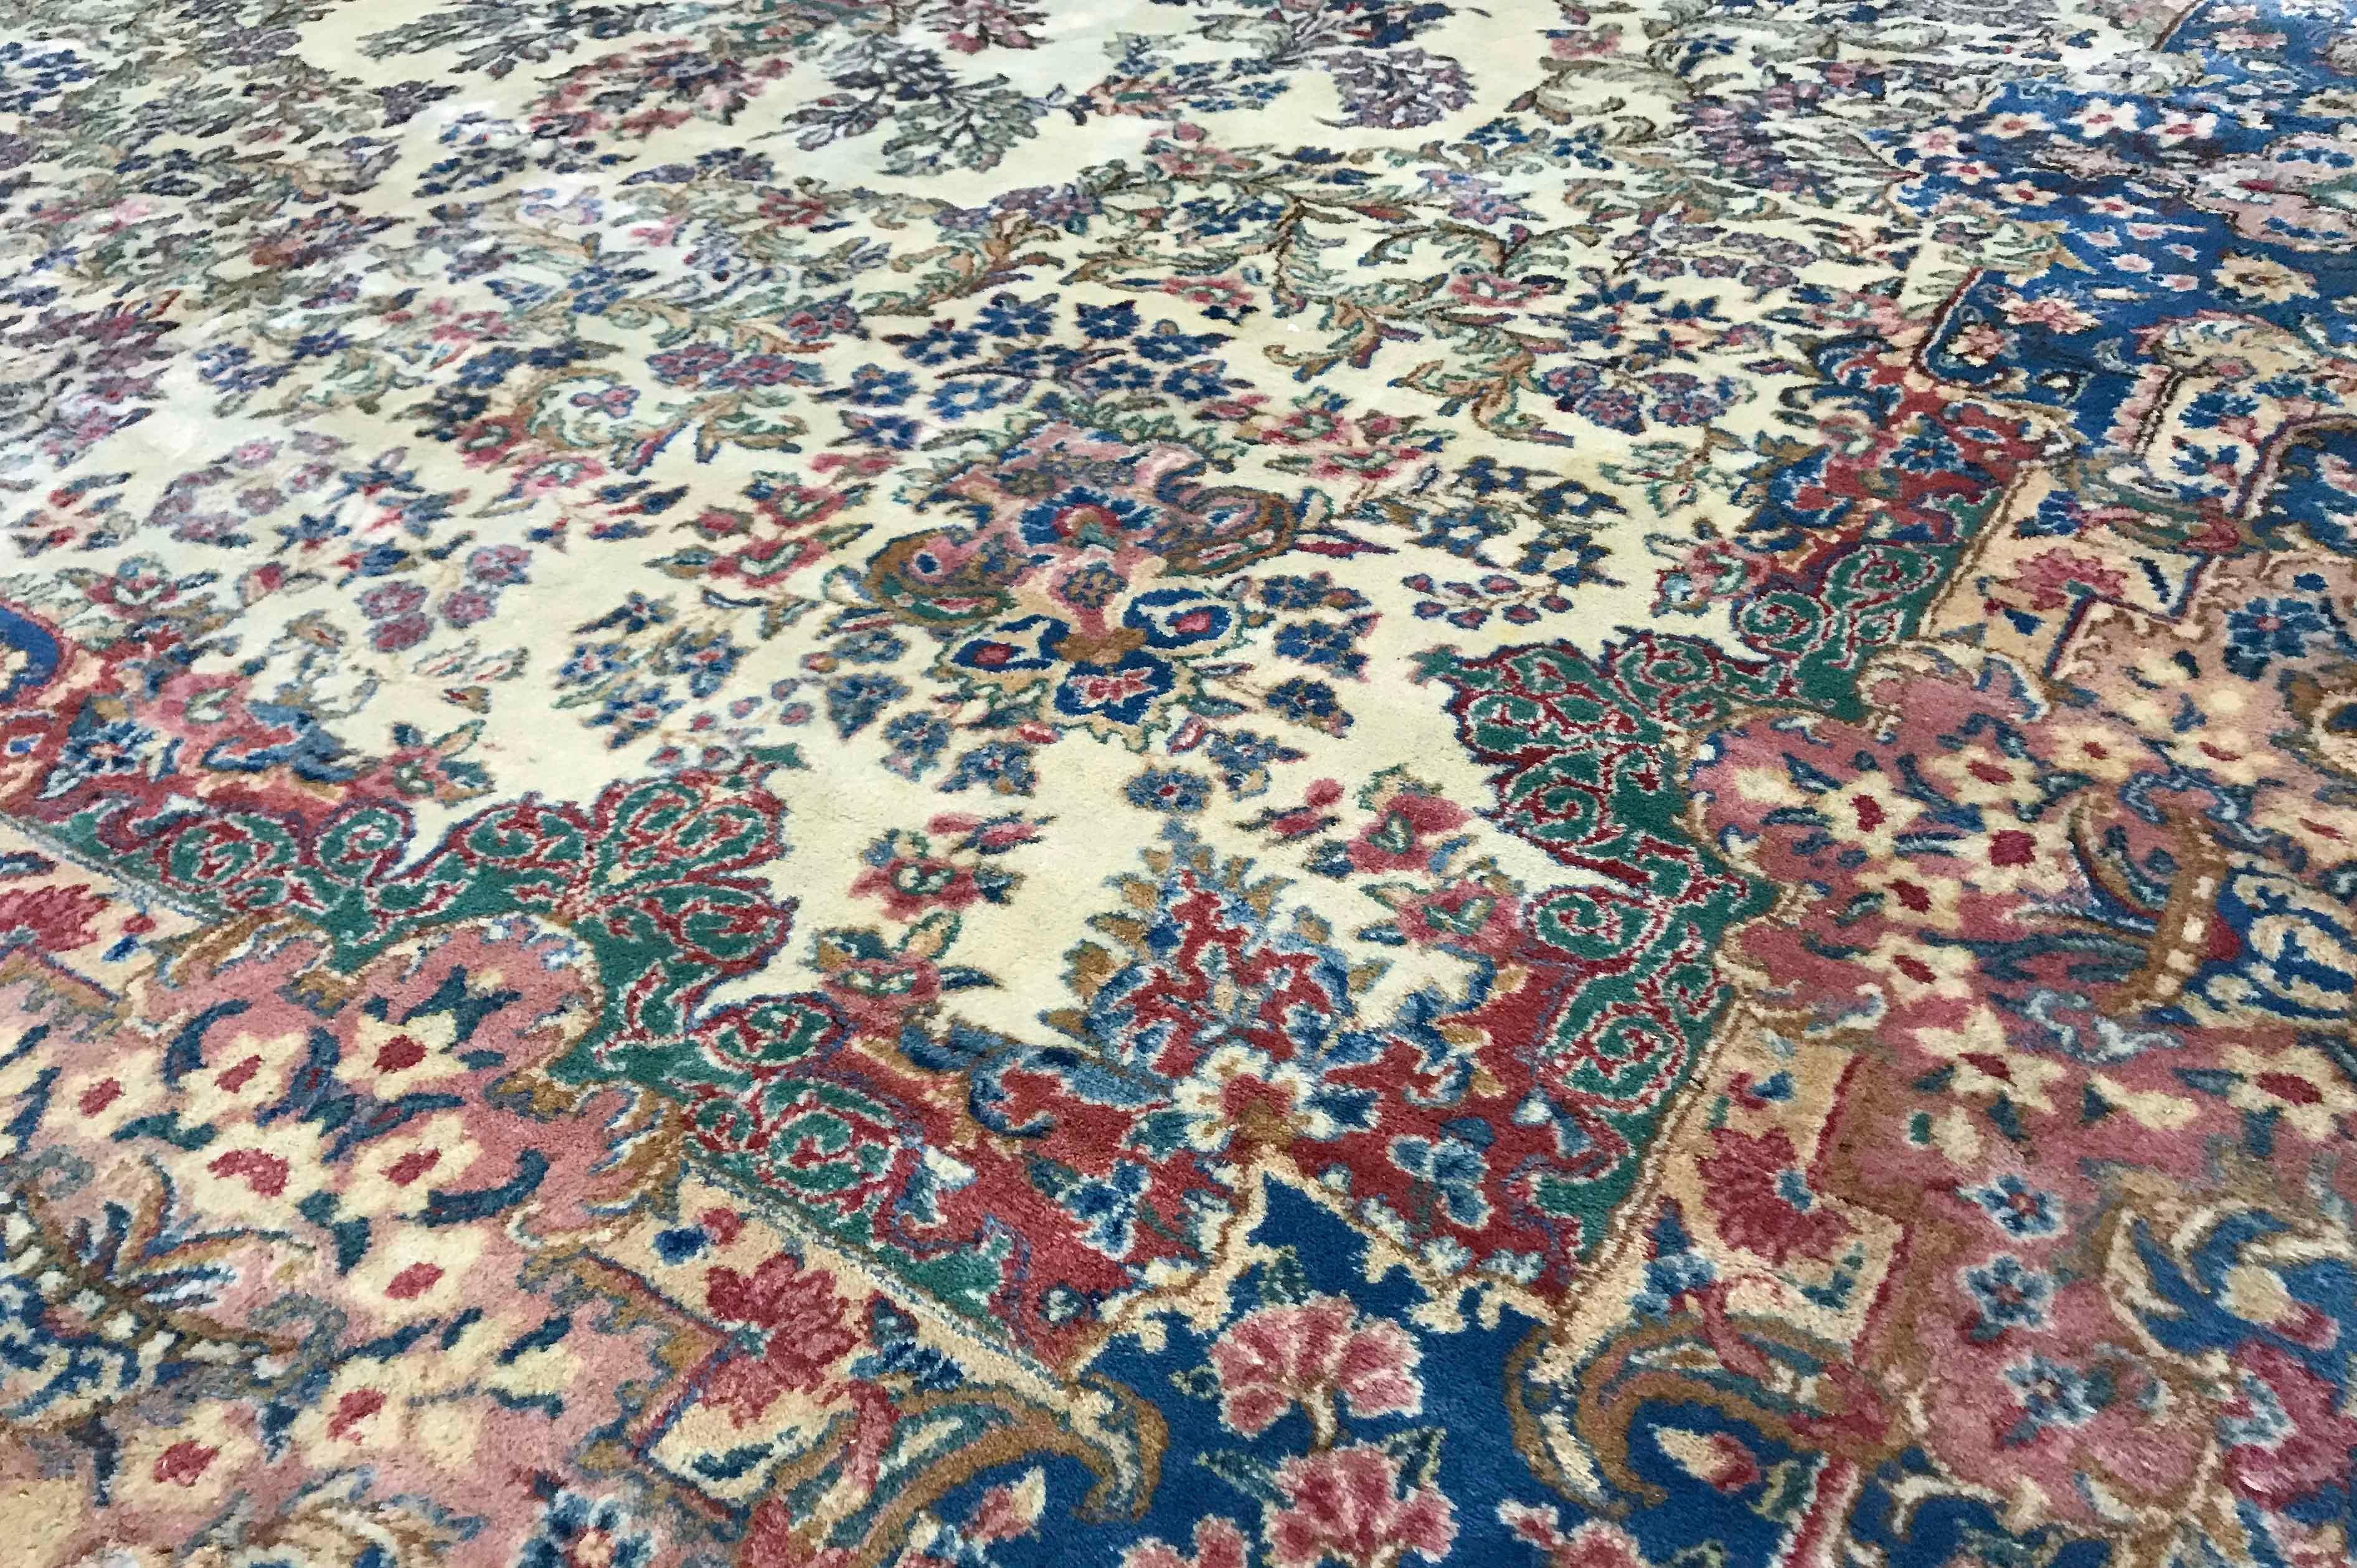 Vintage oversize Persian Kerman rug, circa 1940. This beautiful 1940s Kerman has all the elements that make rugs from this area of Persia so popular. The color combinations combined with the amazing intricate detail creates a true masterpiece of the